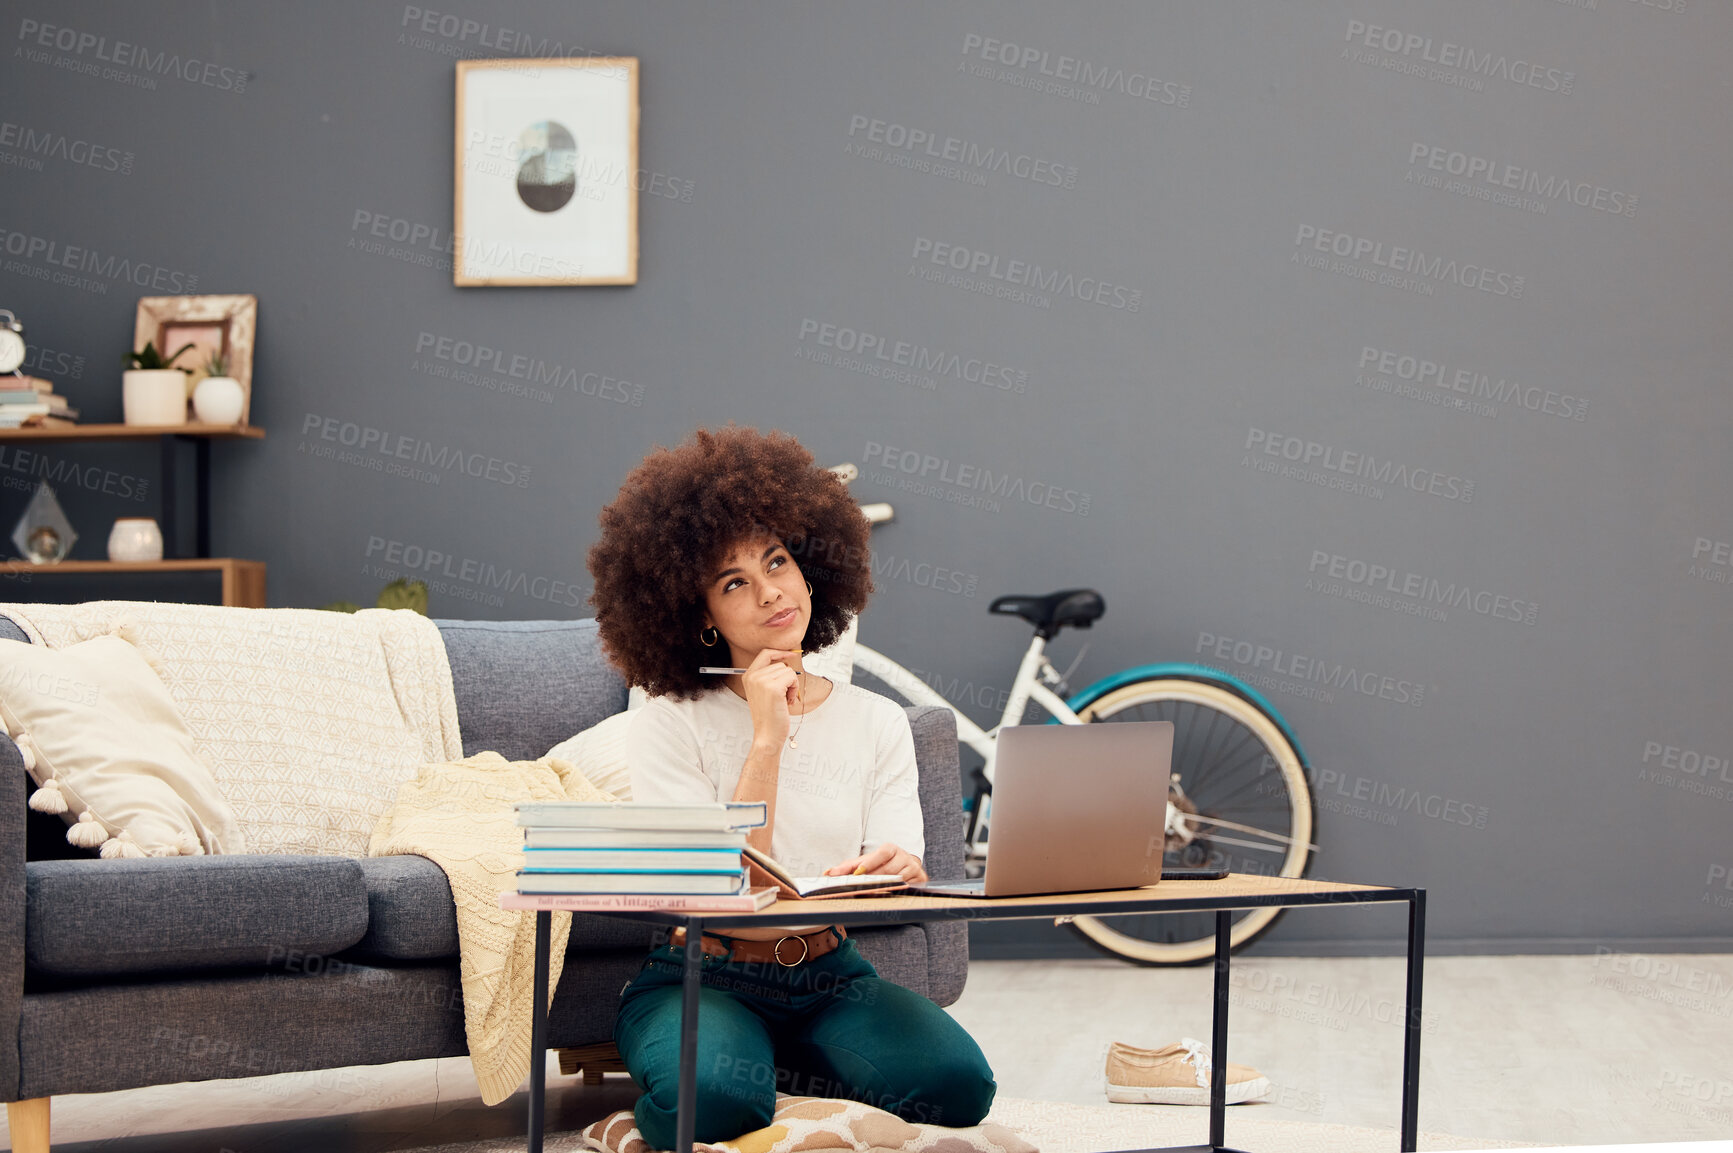 Buy stock photo Student, study and black woman in home thinking of essay writing ideas for college art assignment. Creative, focus and opinion of young afro girl working on university project idea in house.

